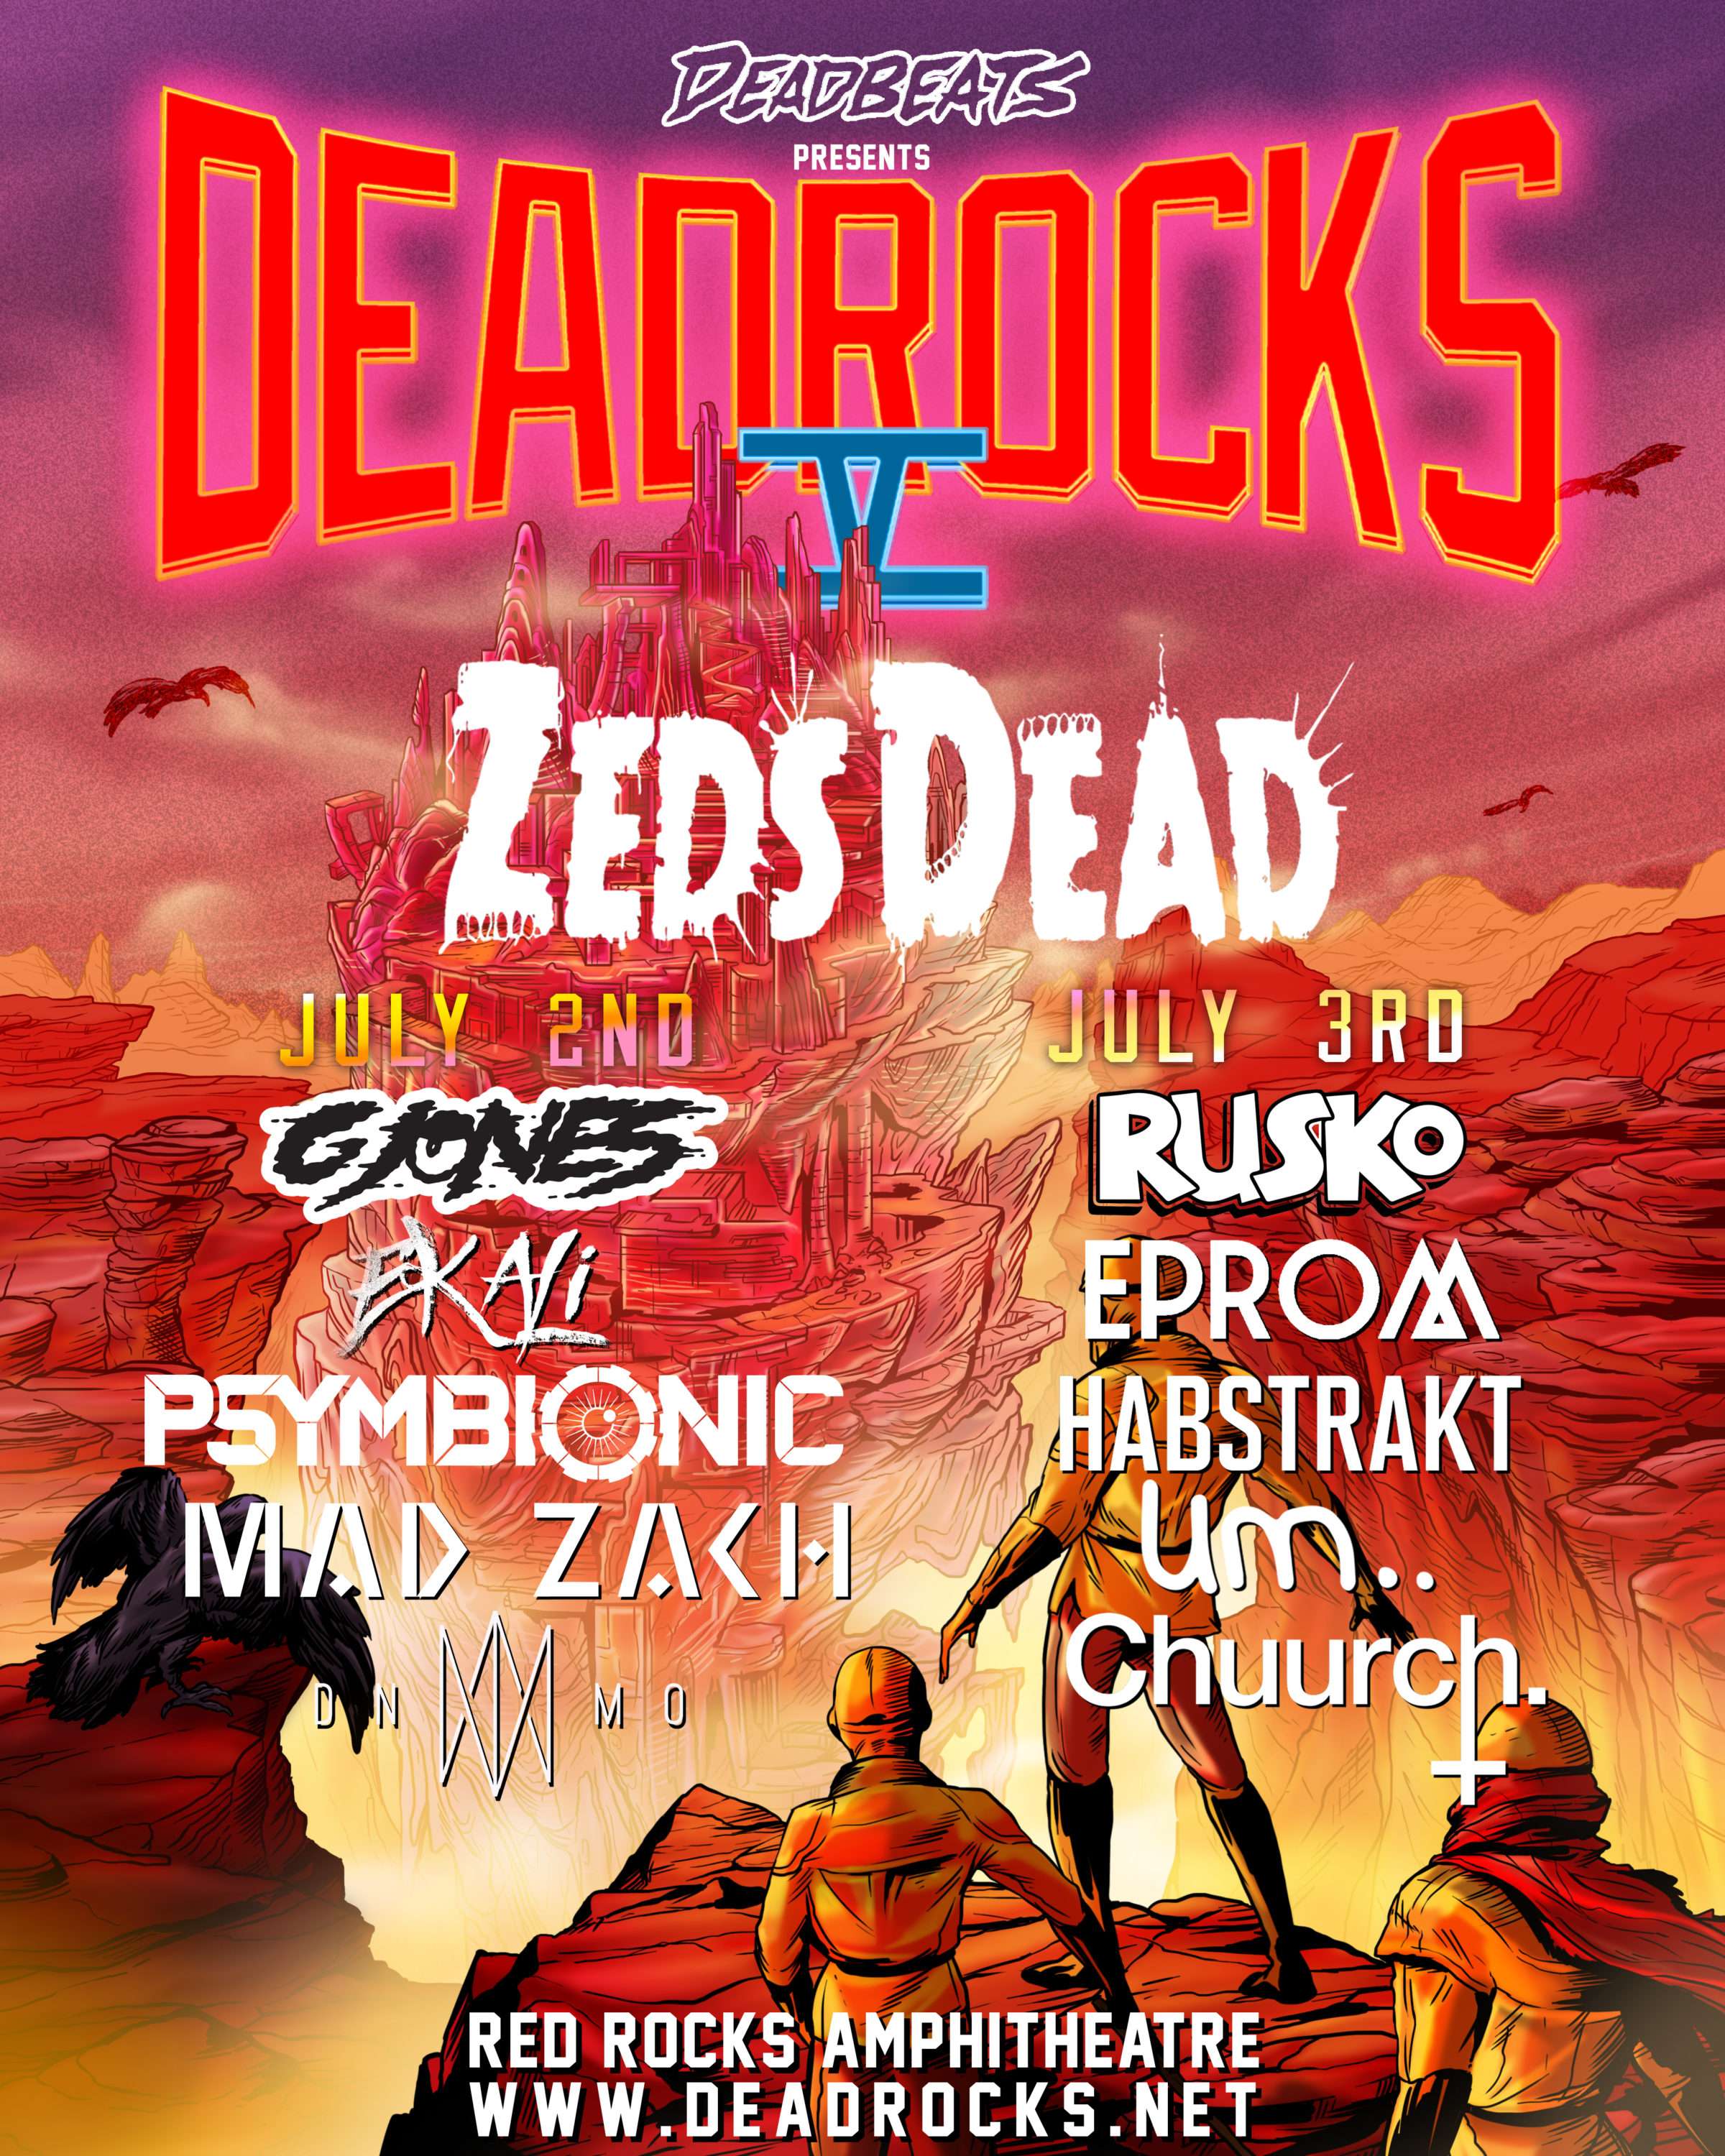 Zeds Dead Reveals Complete Deadrocks Lineup With Two Days Of Insane Bass